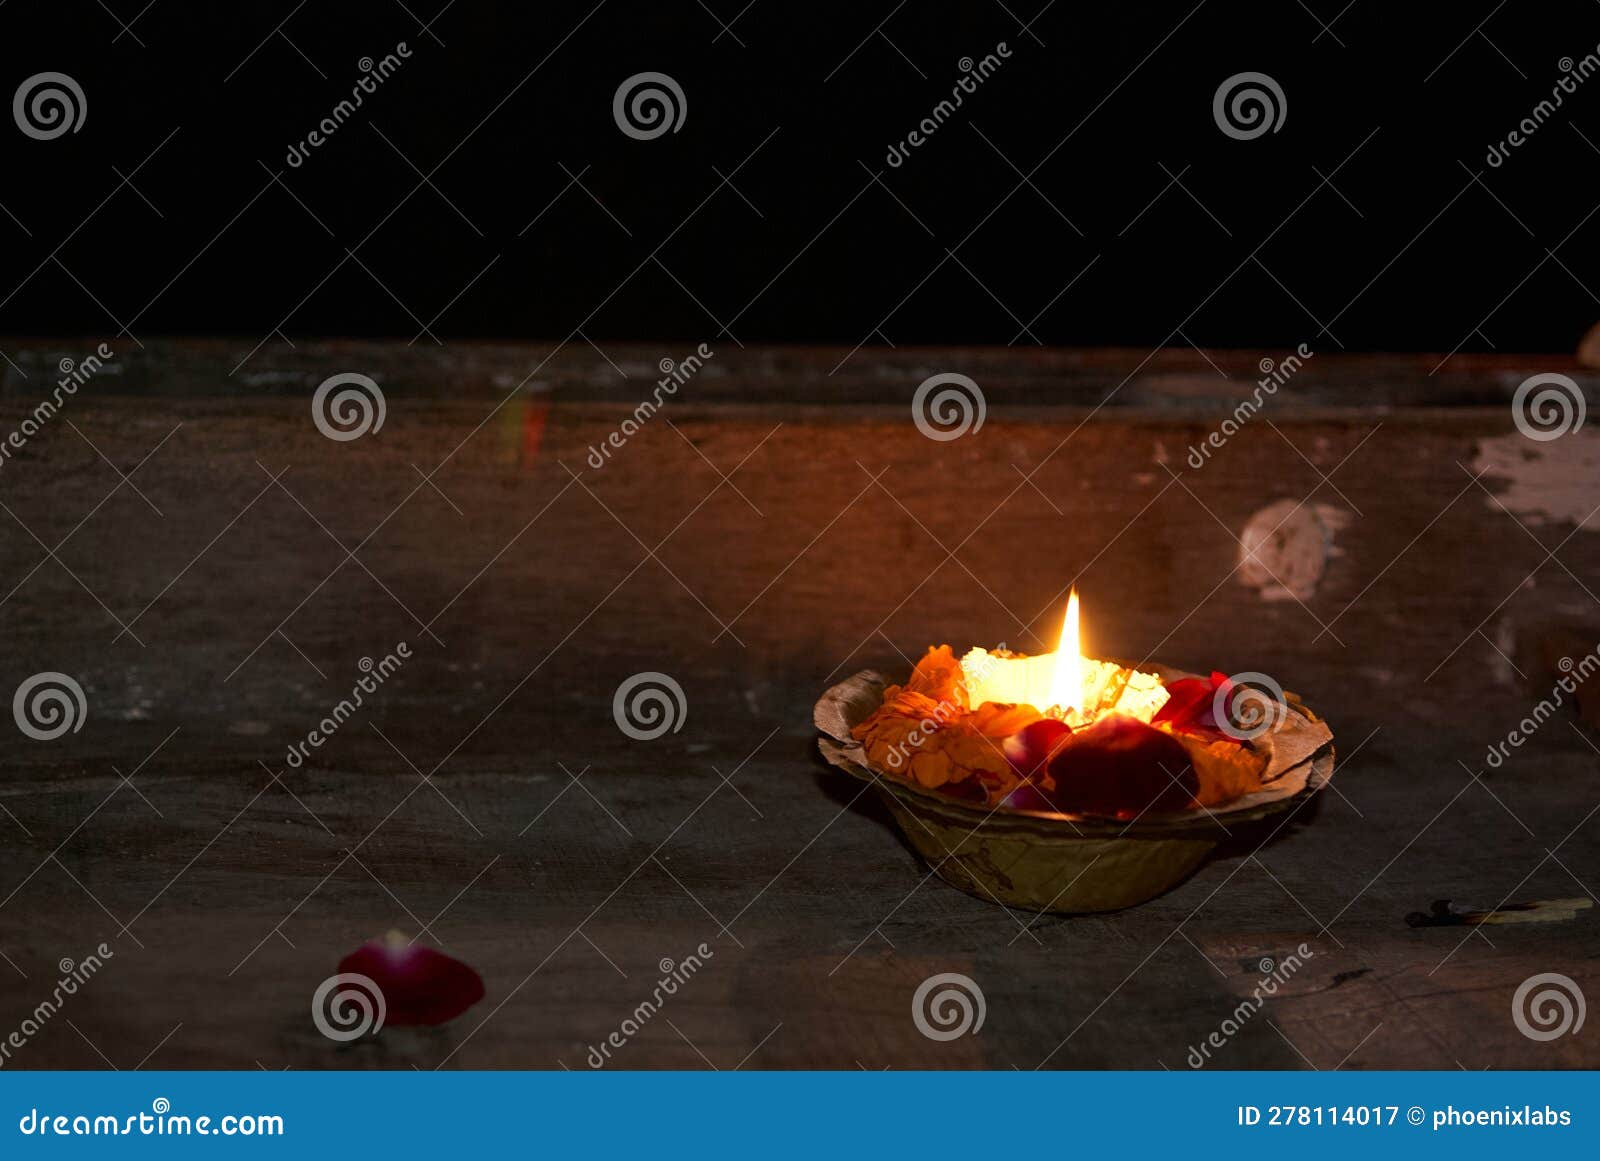 candle burning in the ganges, benares, india